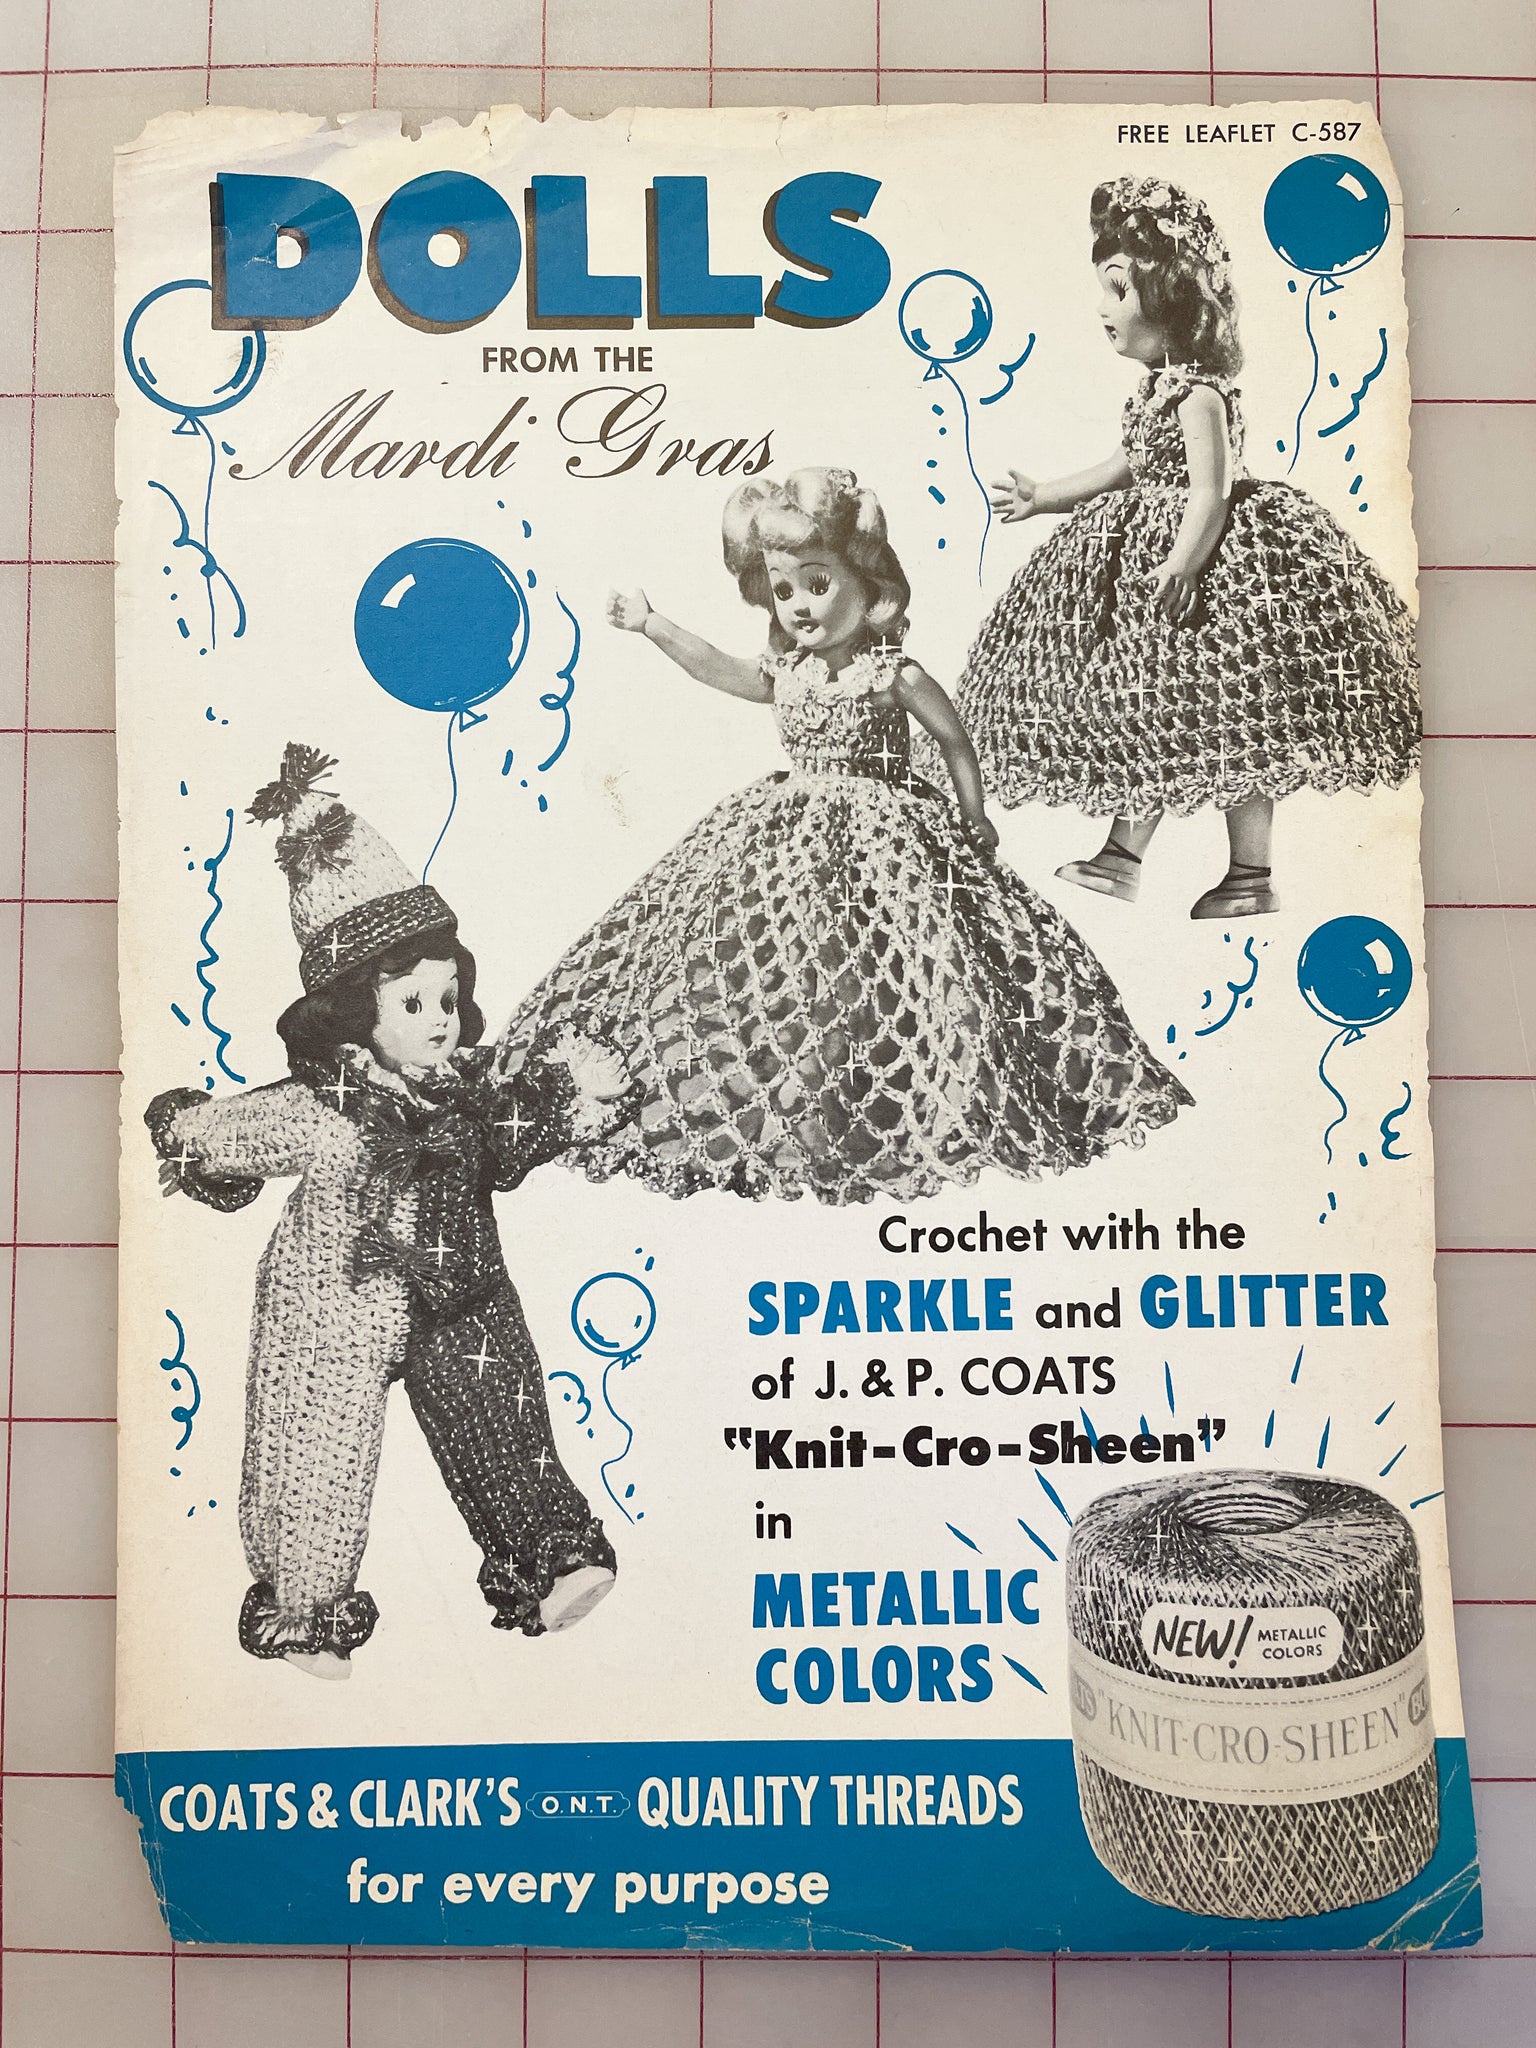 1954 Leaflet C-587: Dolls From the Mardi Gras